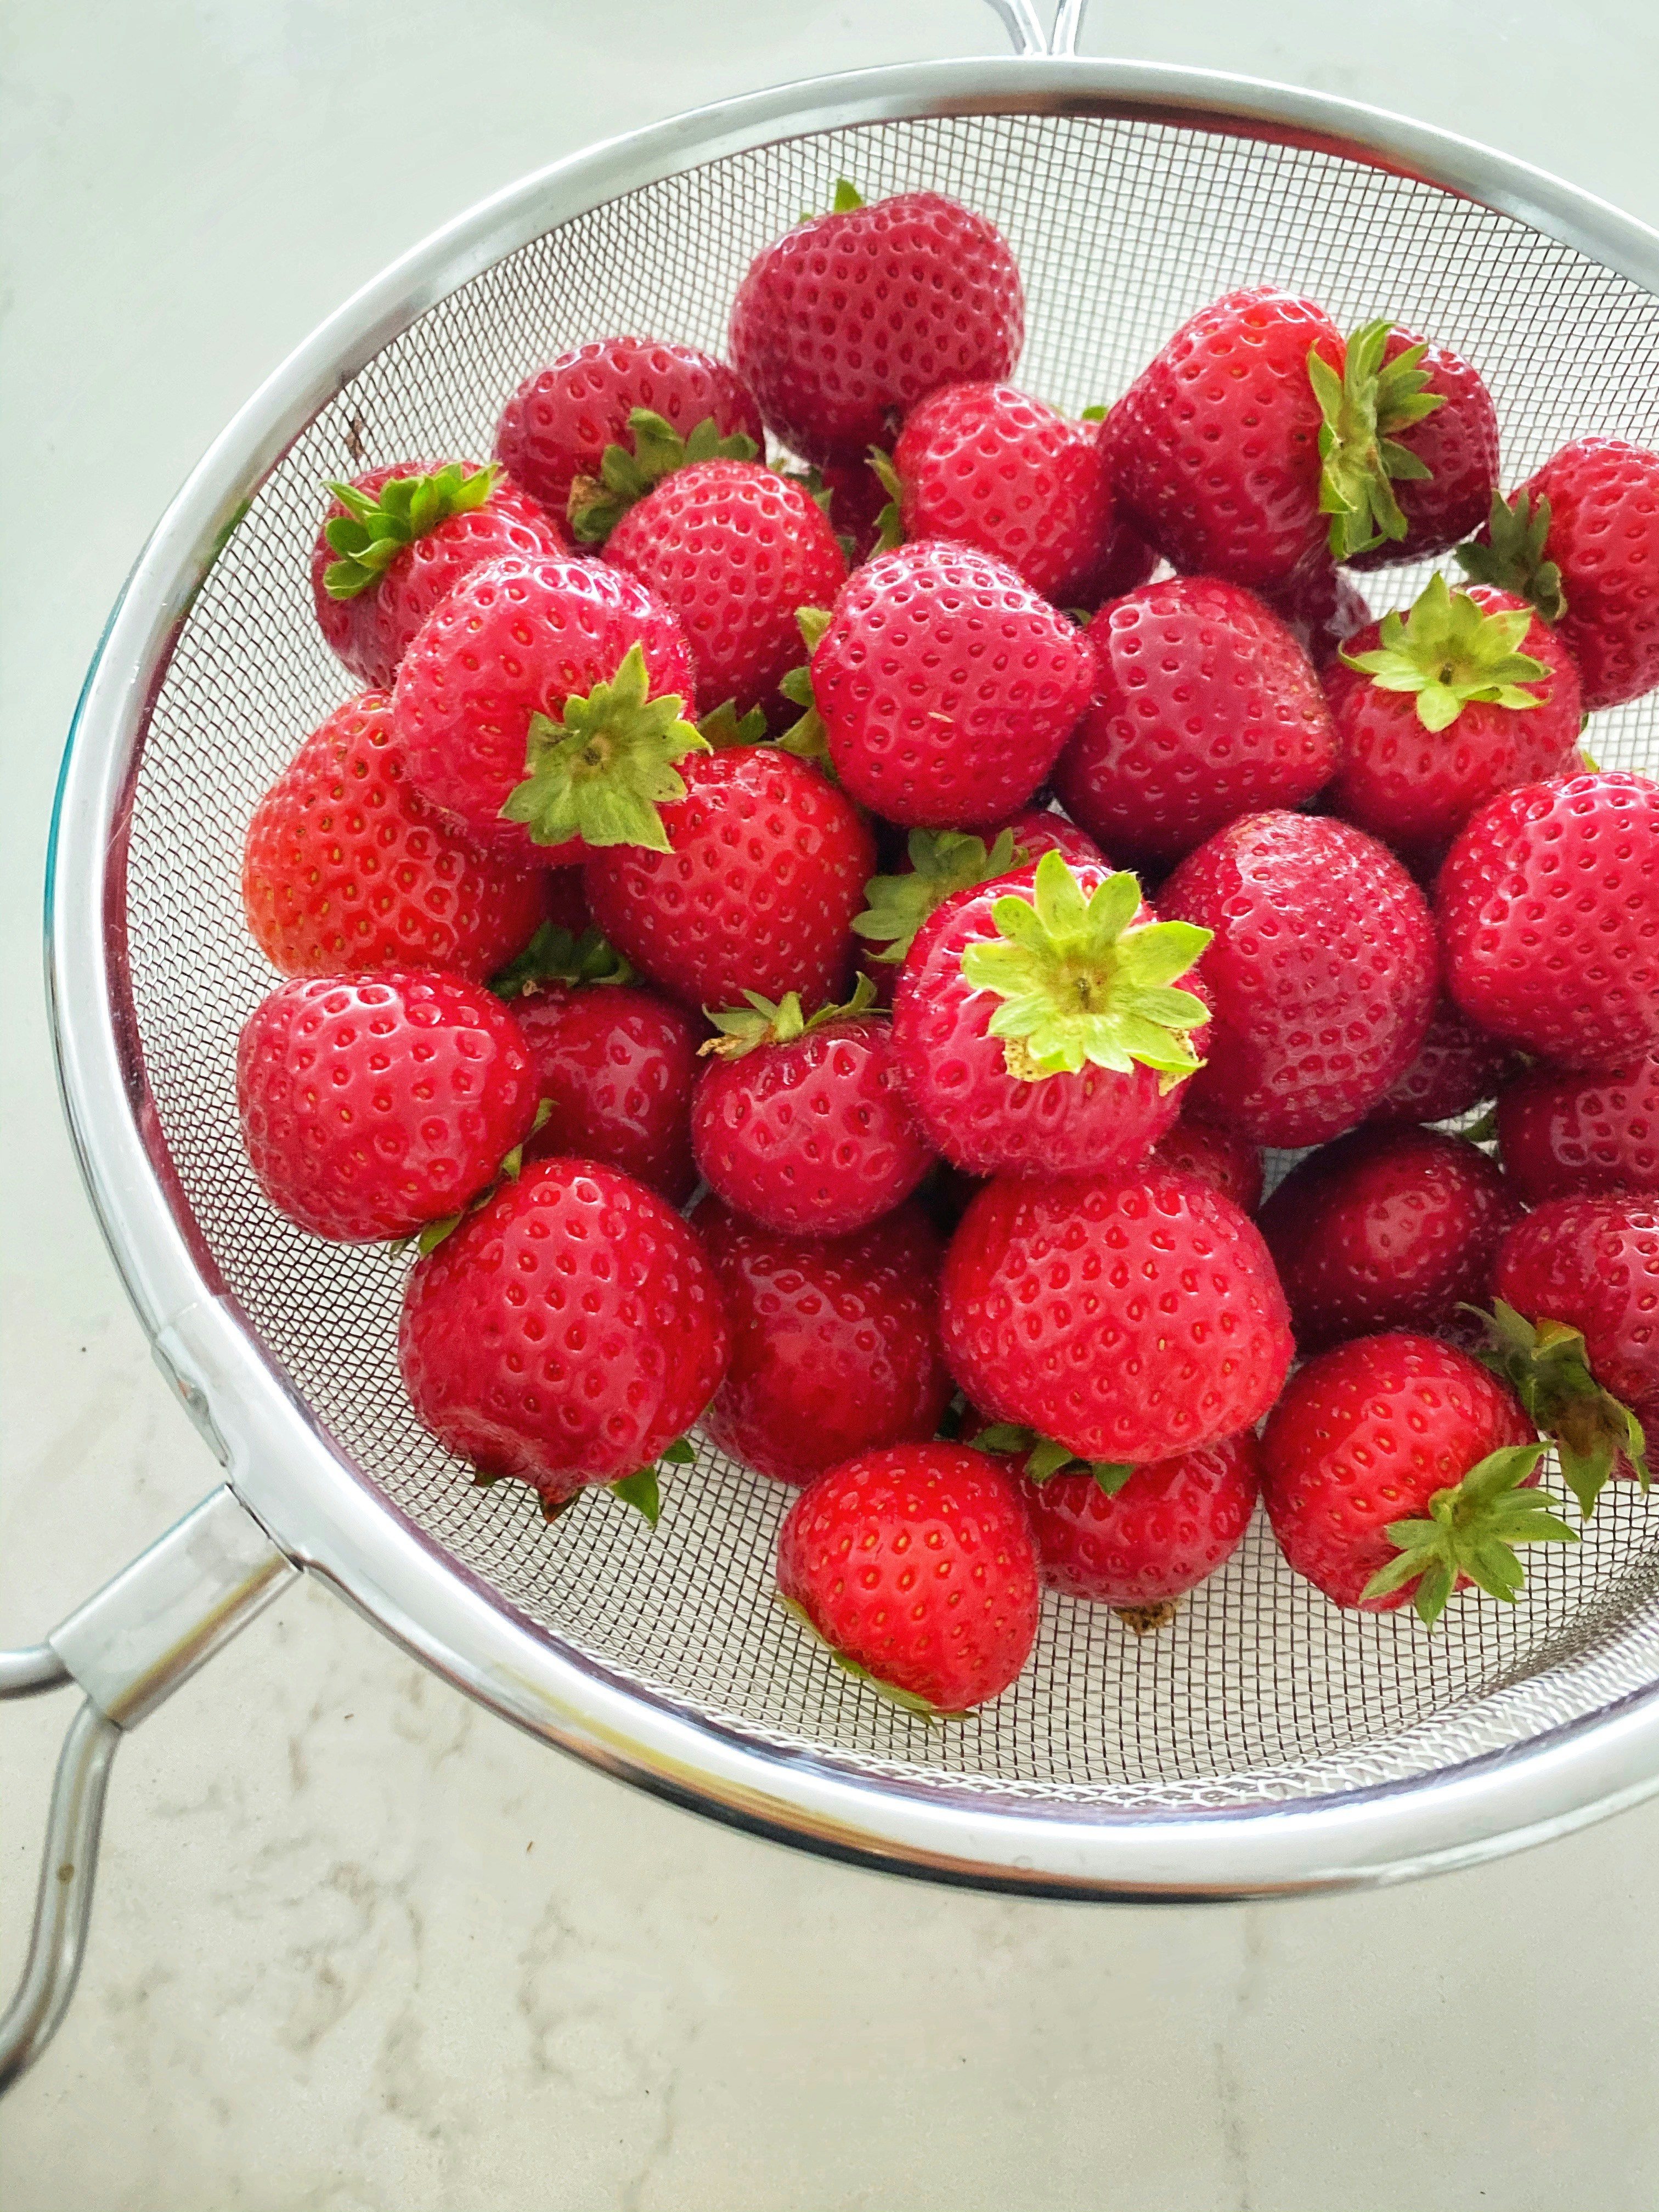 Red strawberries in a colander on a marble kitchen counter.